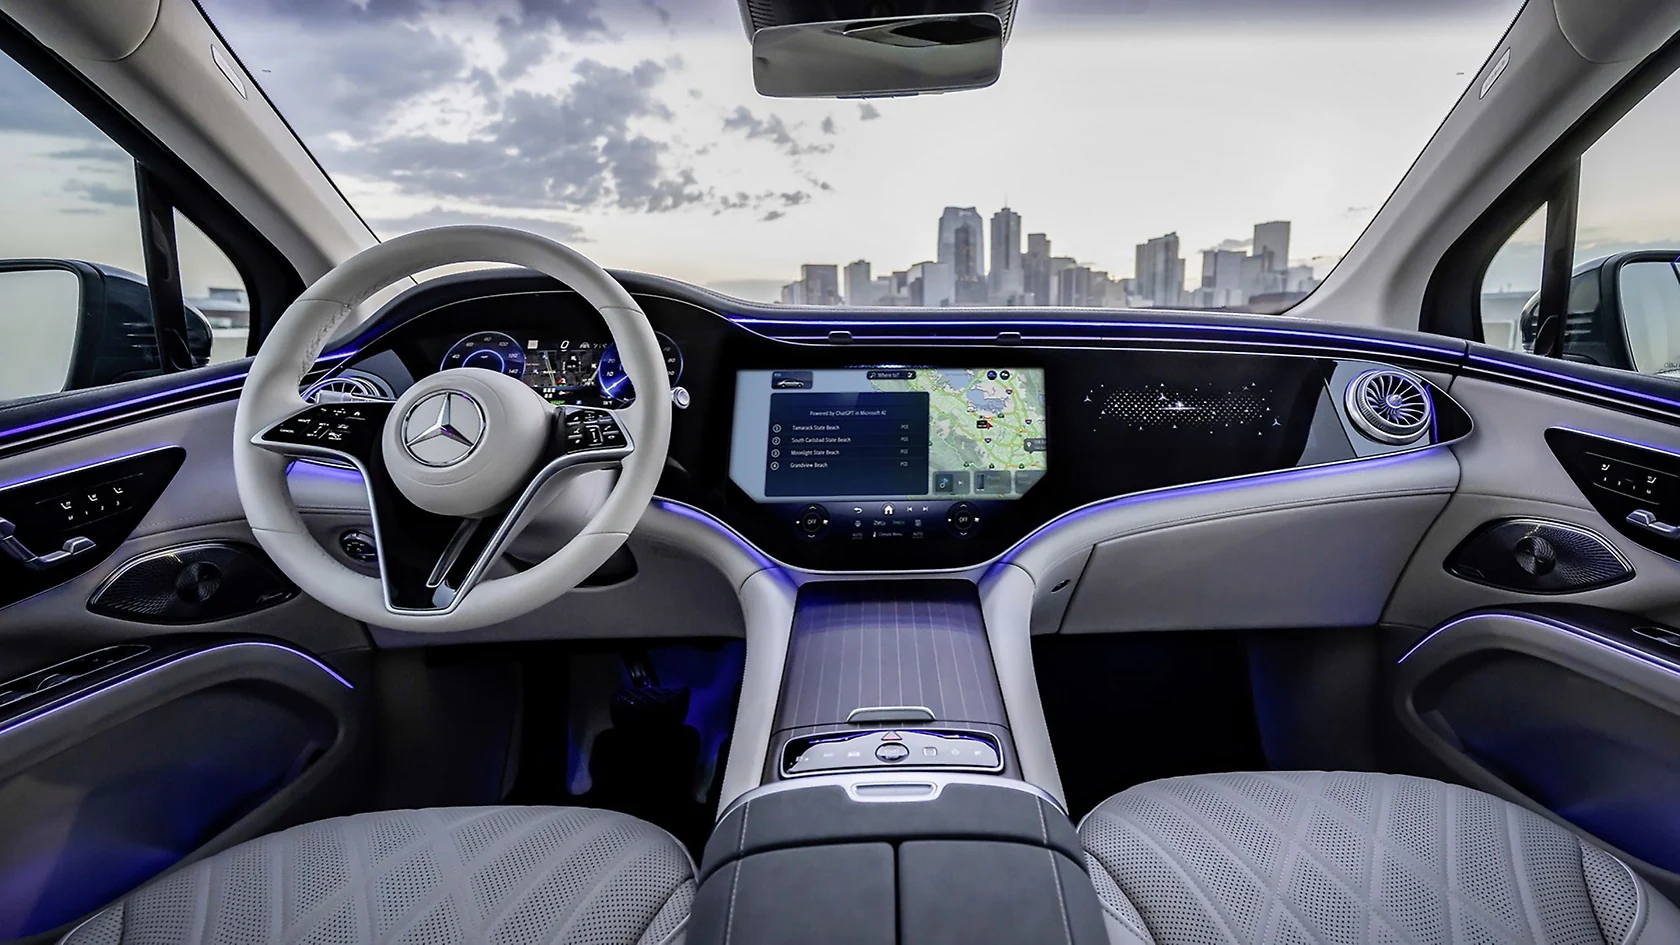 Conceptual photo of the inside of a car